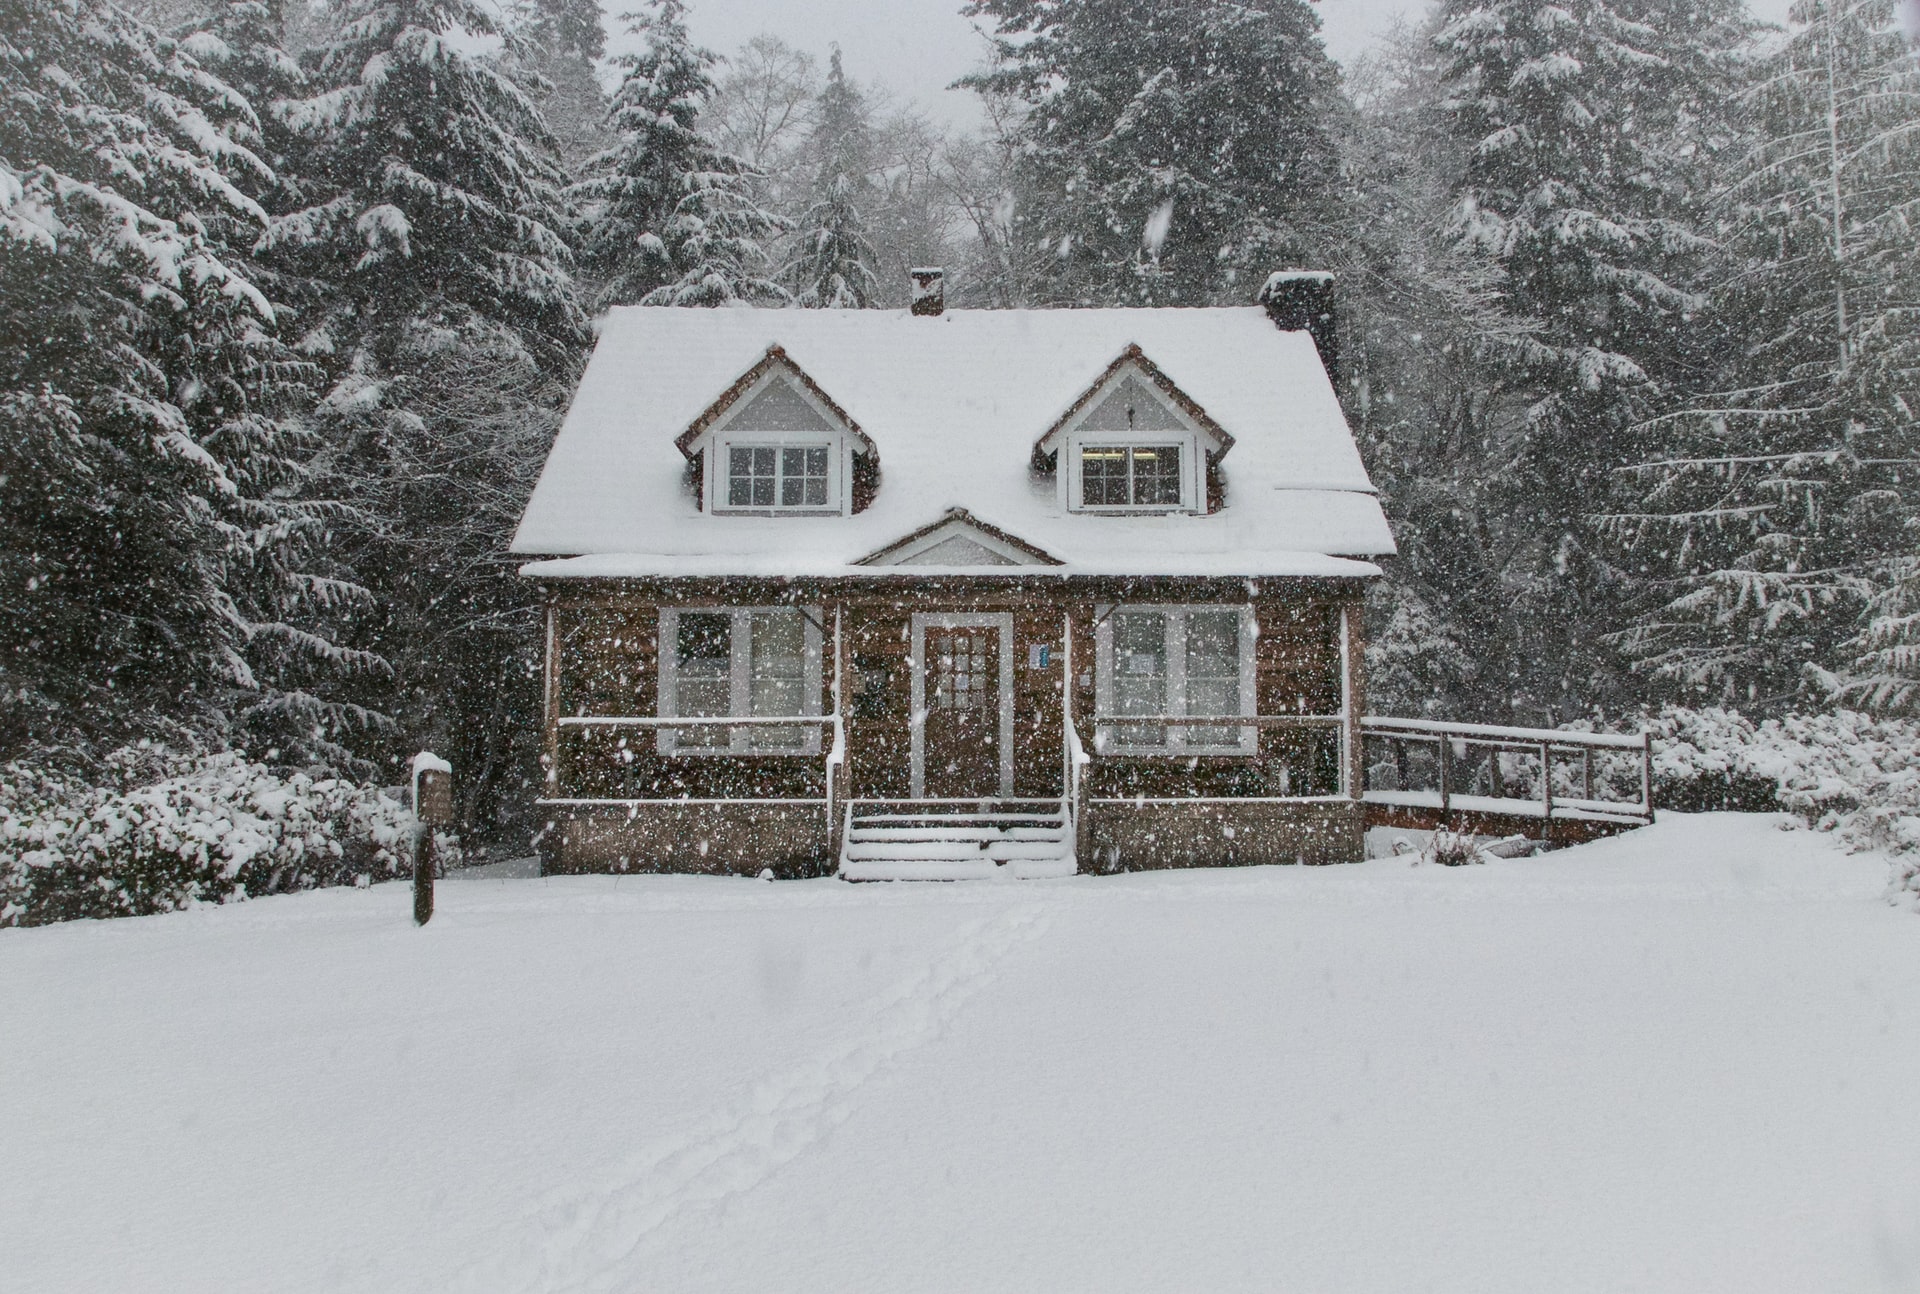 sam beasley MVriaJOjgp8 unsplash - 6 Winter Safety Tips For Your Home